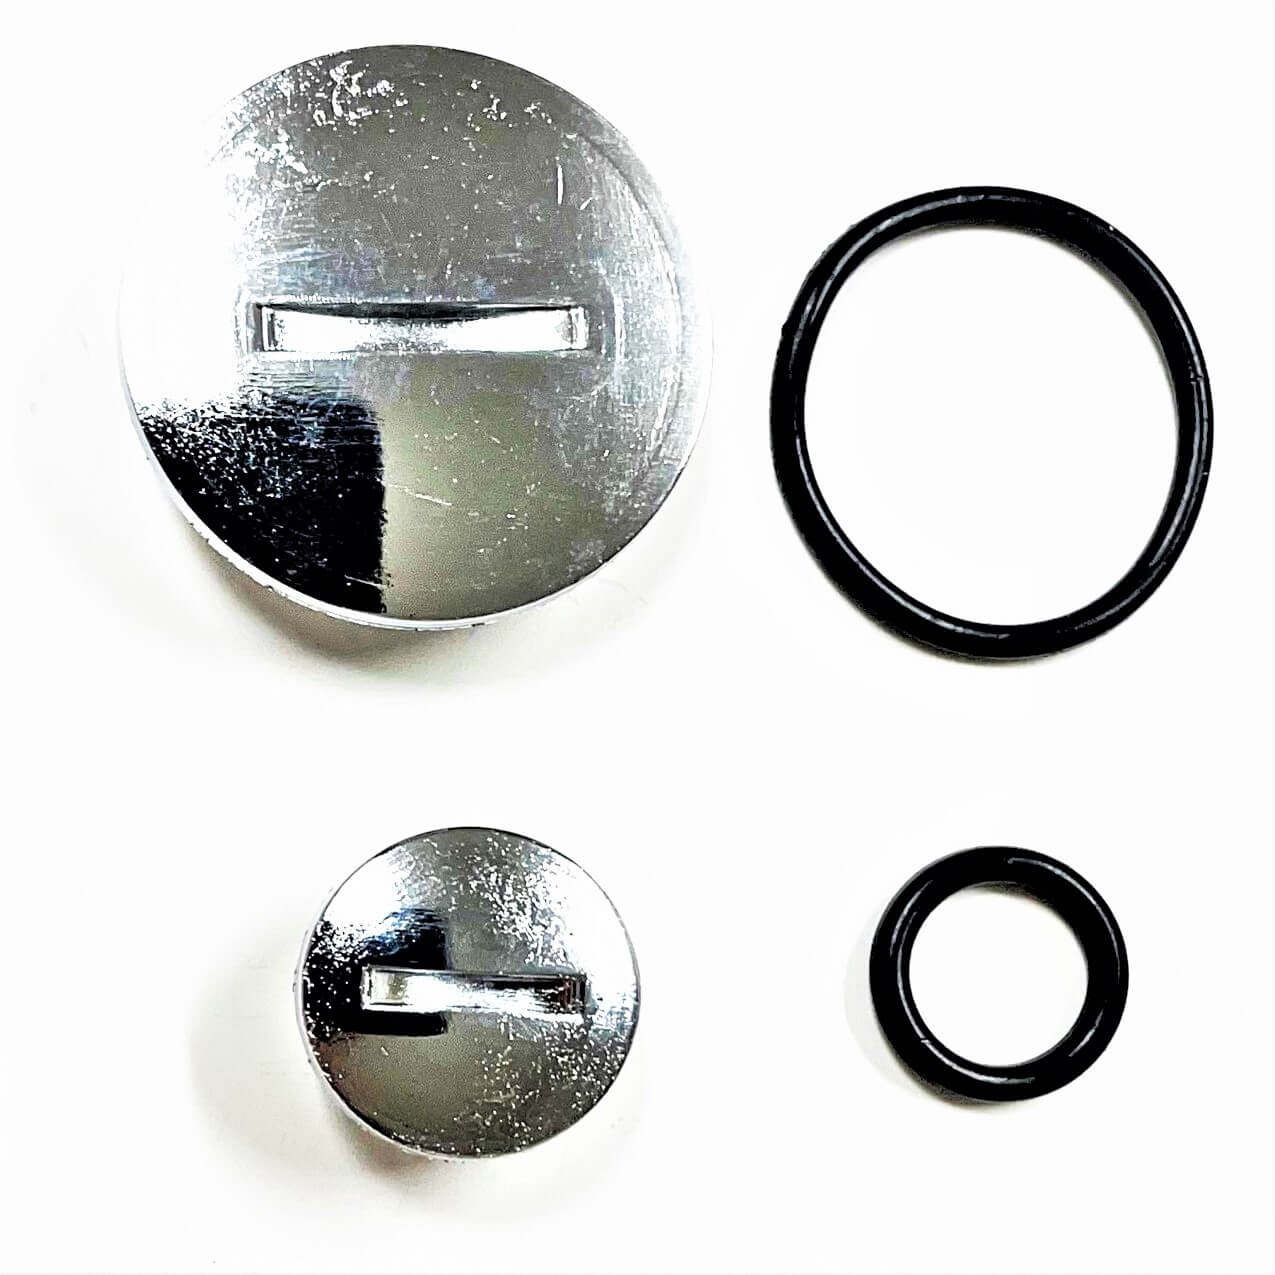 DUST COVER SCREW Kit Fits 50-125cc ATVs & Dirtbikes. Large Cap OD=36mm, Small Cap OD=21mm